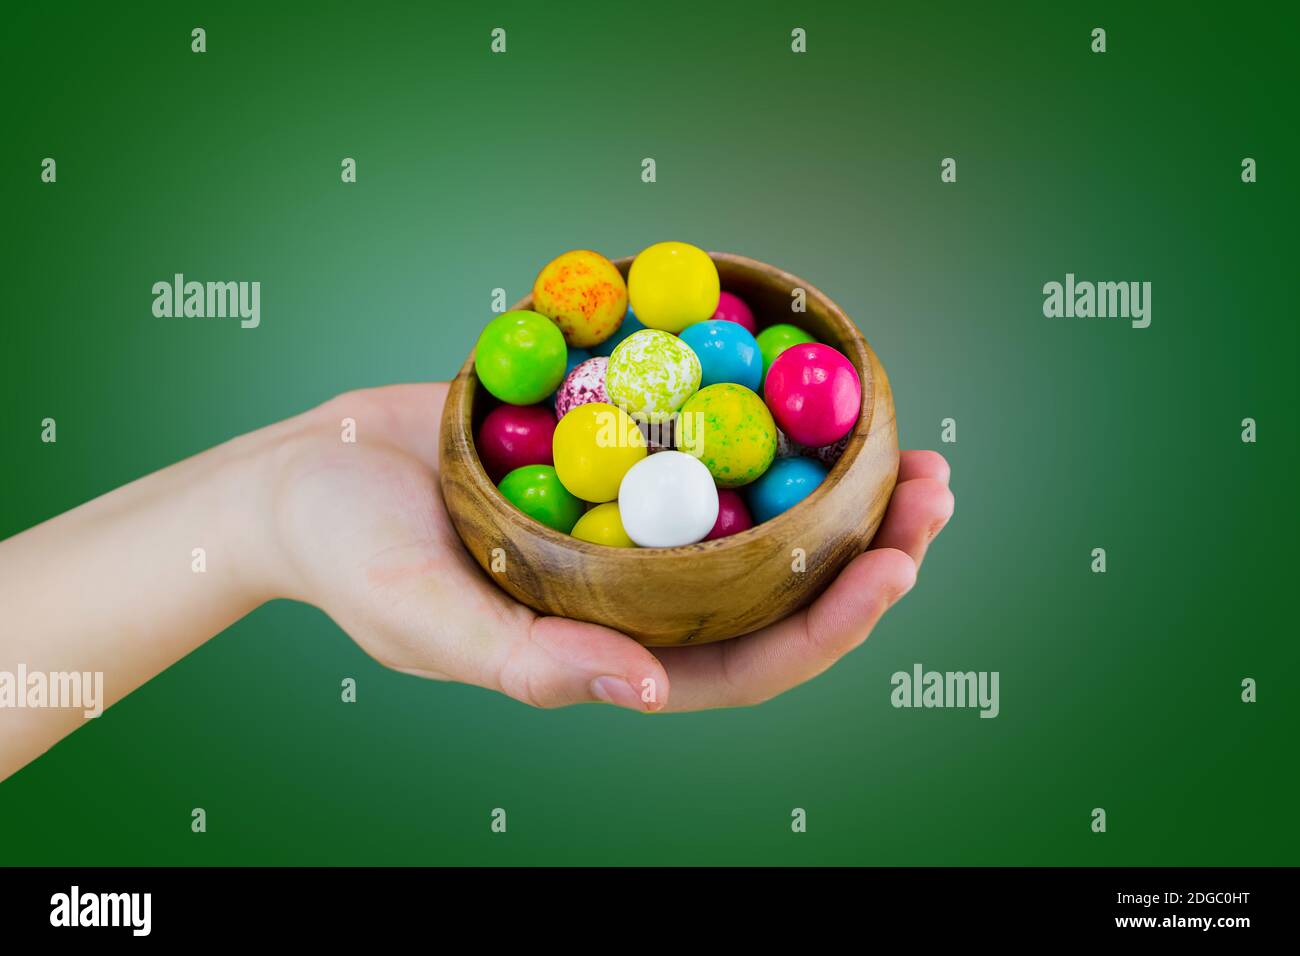 Bright candy chewing gum in a wooden bowl dish lies on the palm of hand on a green background macro Stock Photo